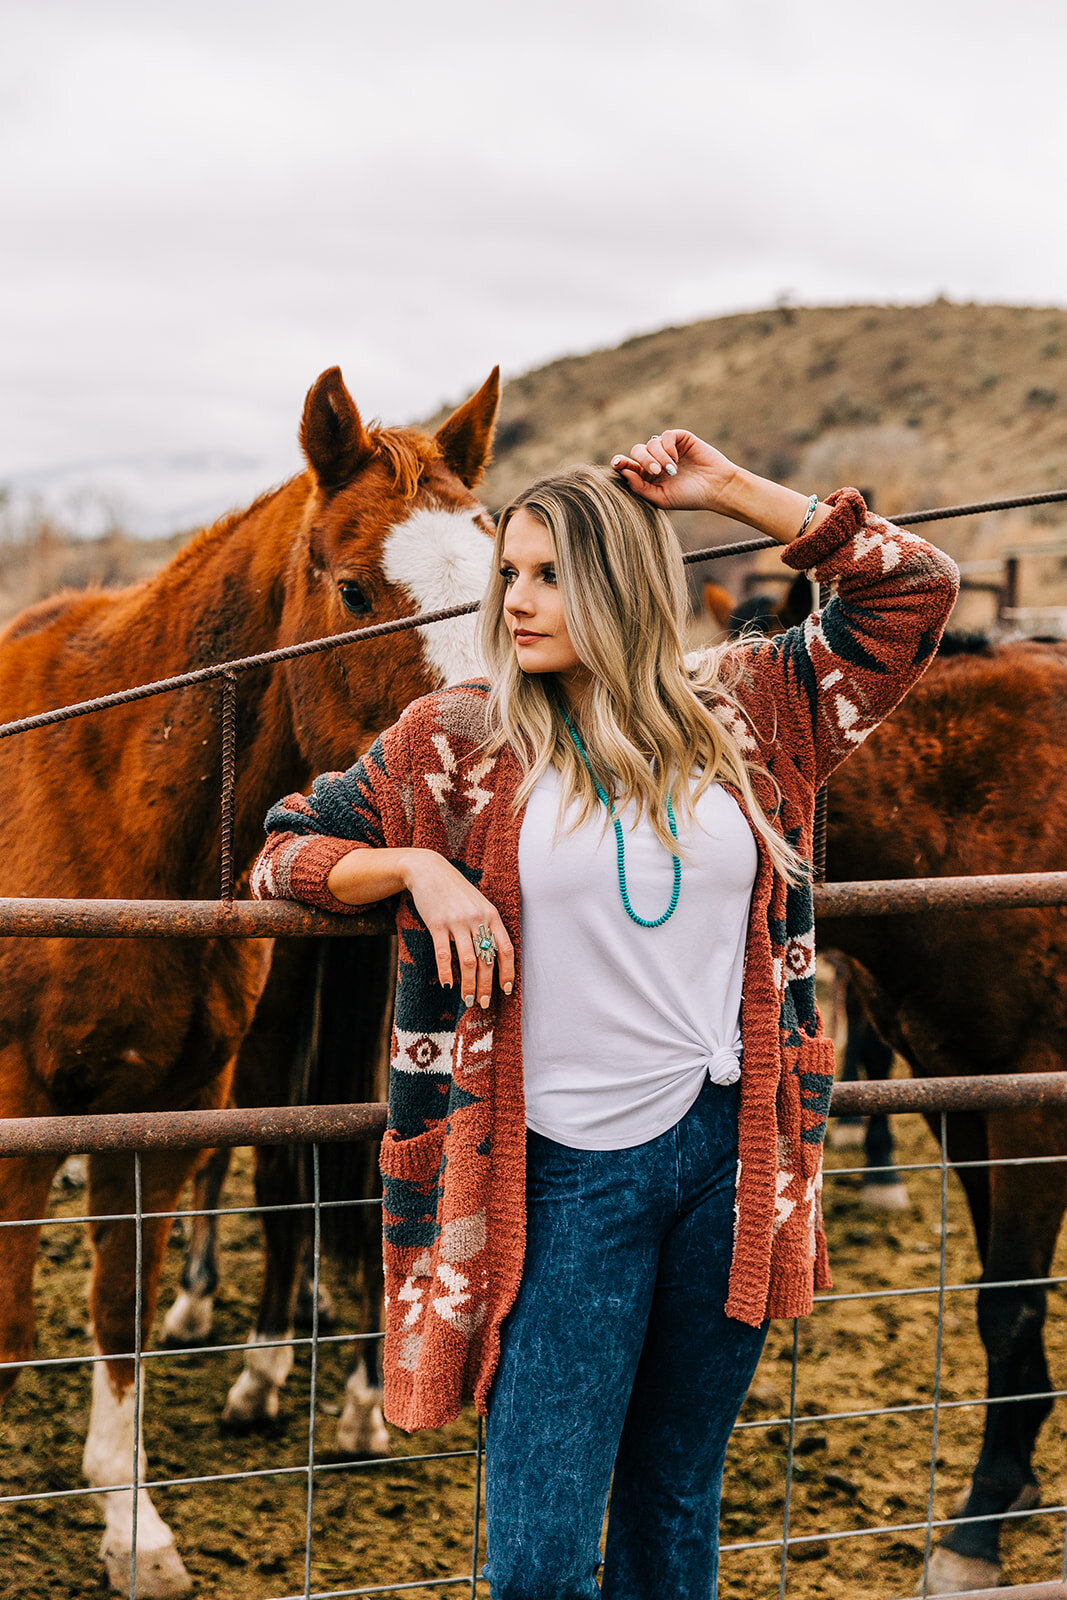  native cardigan stone jewelry accent jewelry long hairstyles hair and makeup inspiration country style professional photographers in utah commercial photographers in utah horses wild rag boutique commercial photography product photography weber utah